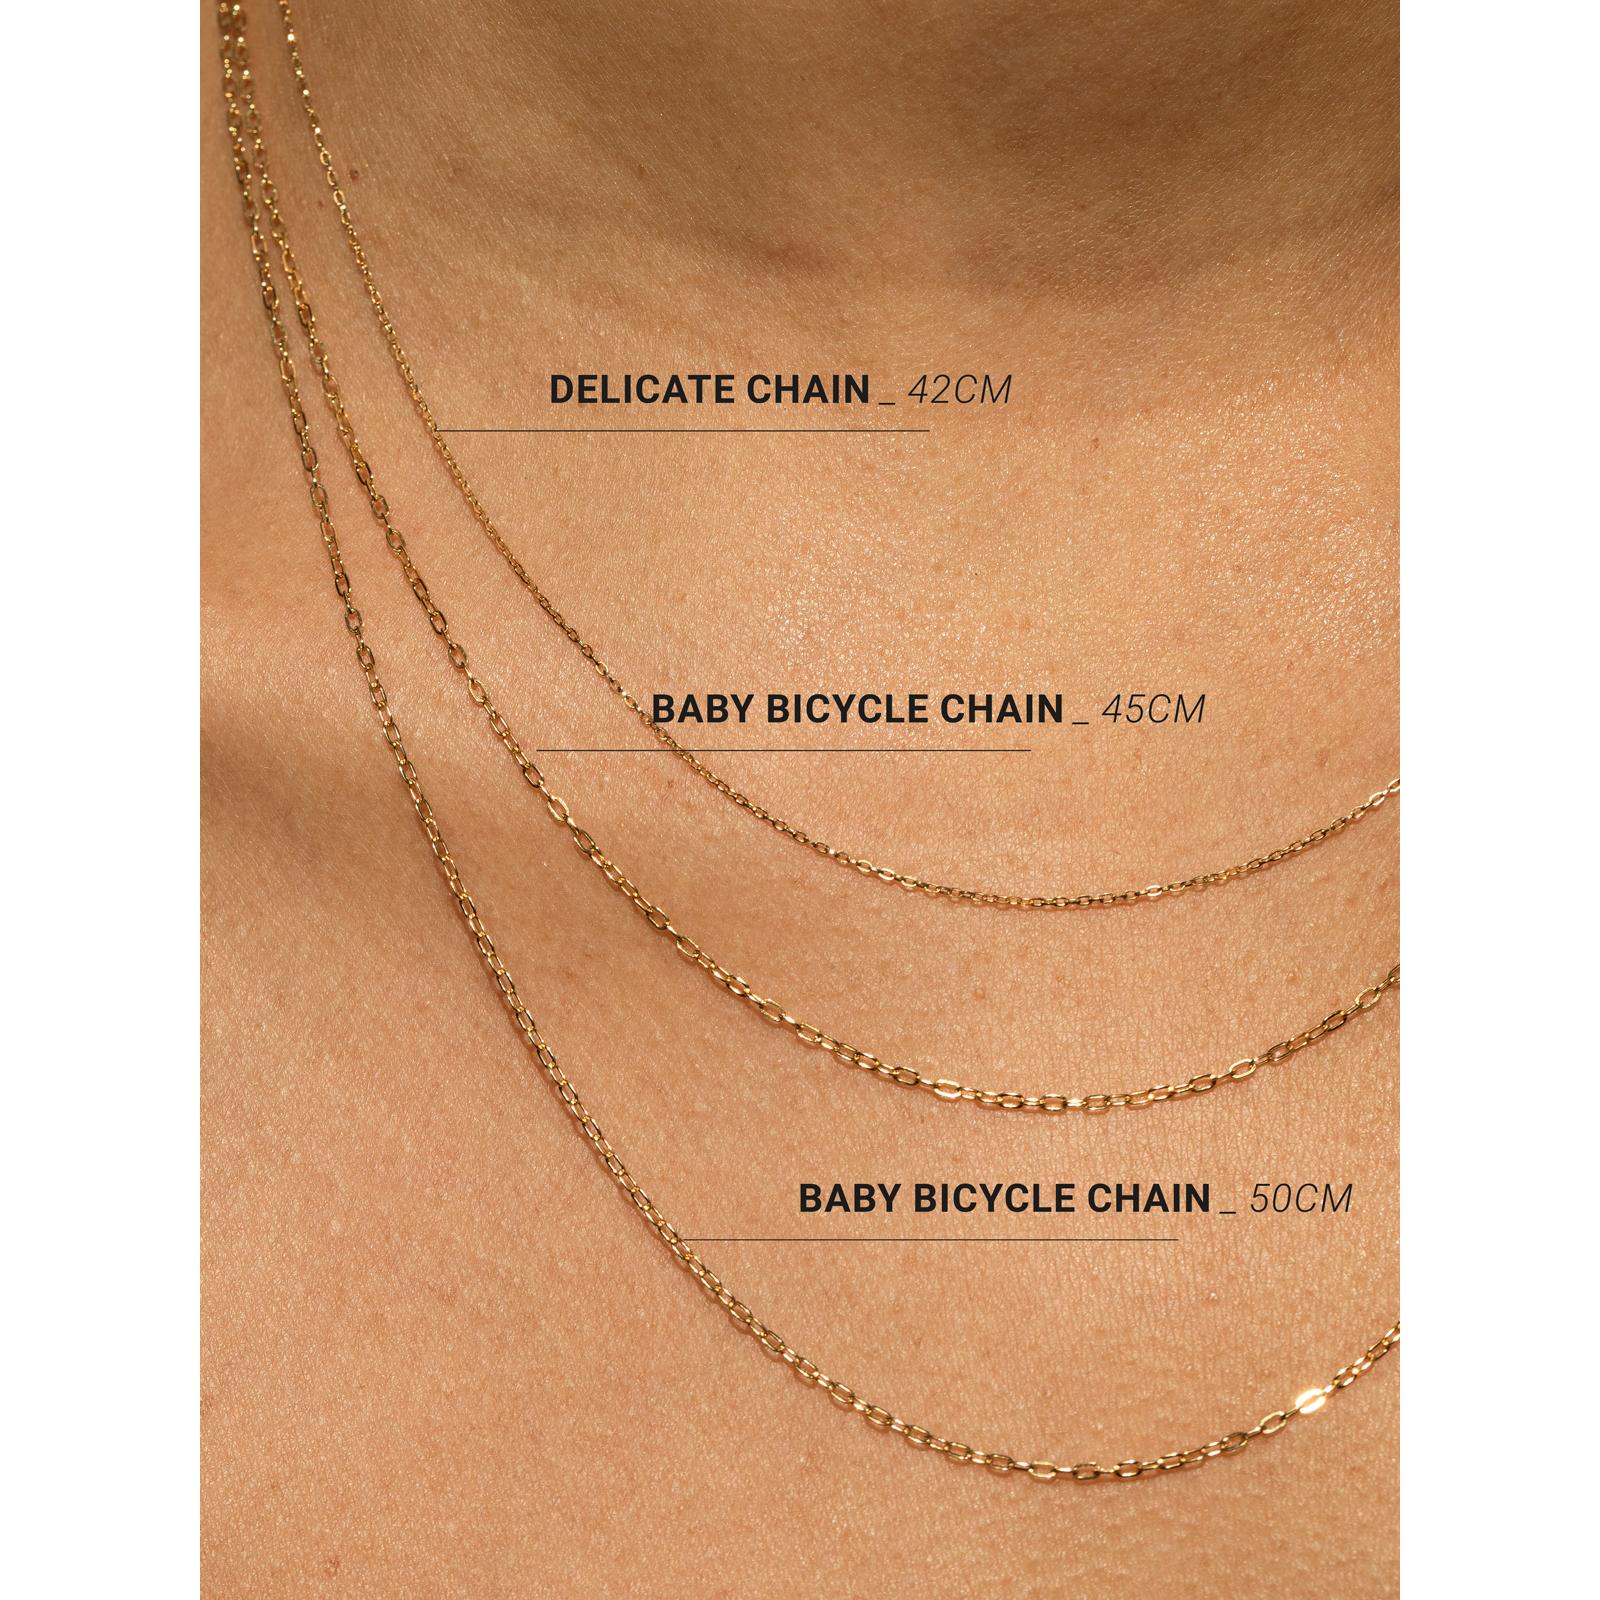 baby bicycle chain